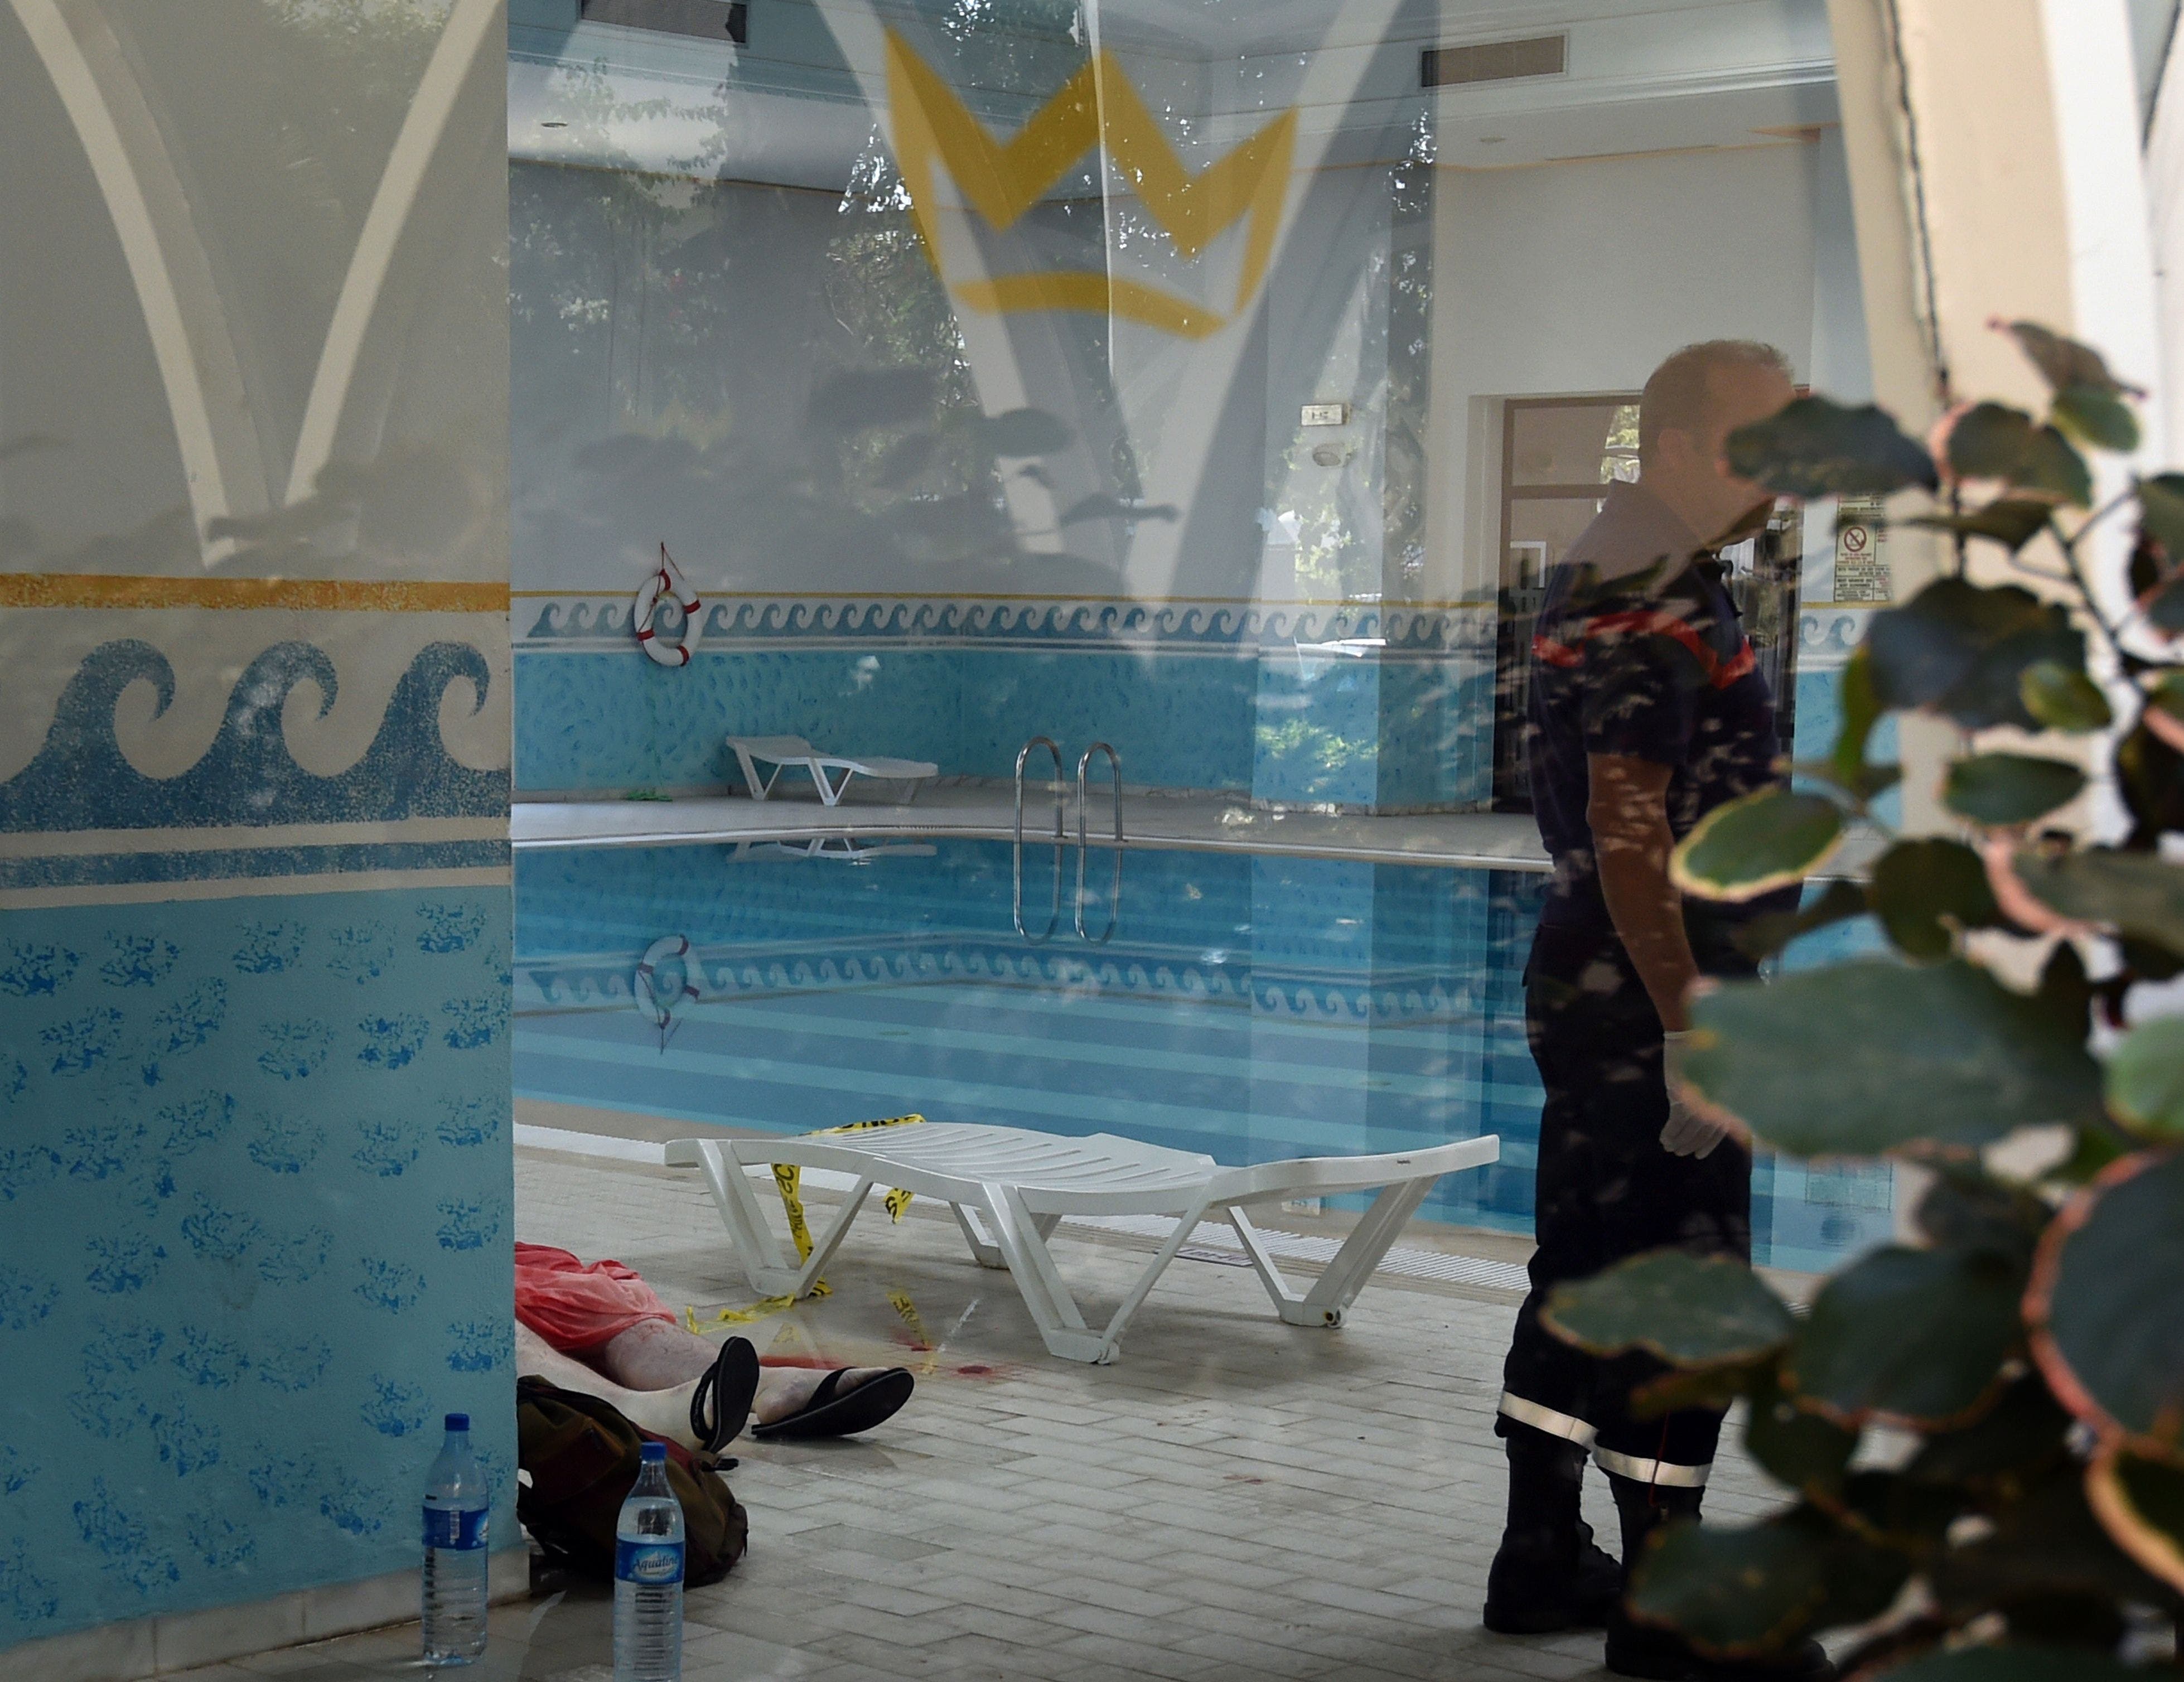  A Tunisian medic stands next to the body of a tourist at the Imperial hotel in the resort town of Sousse,